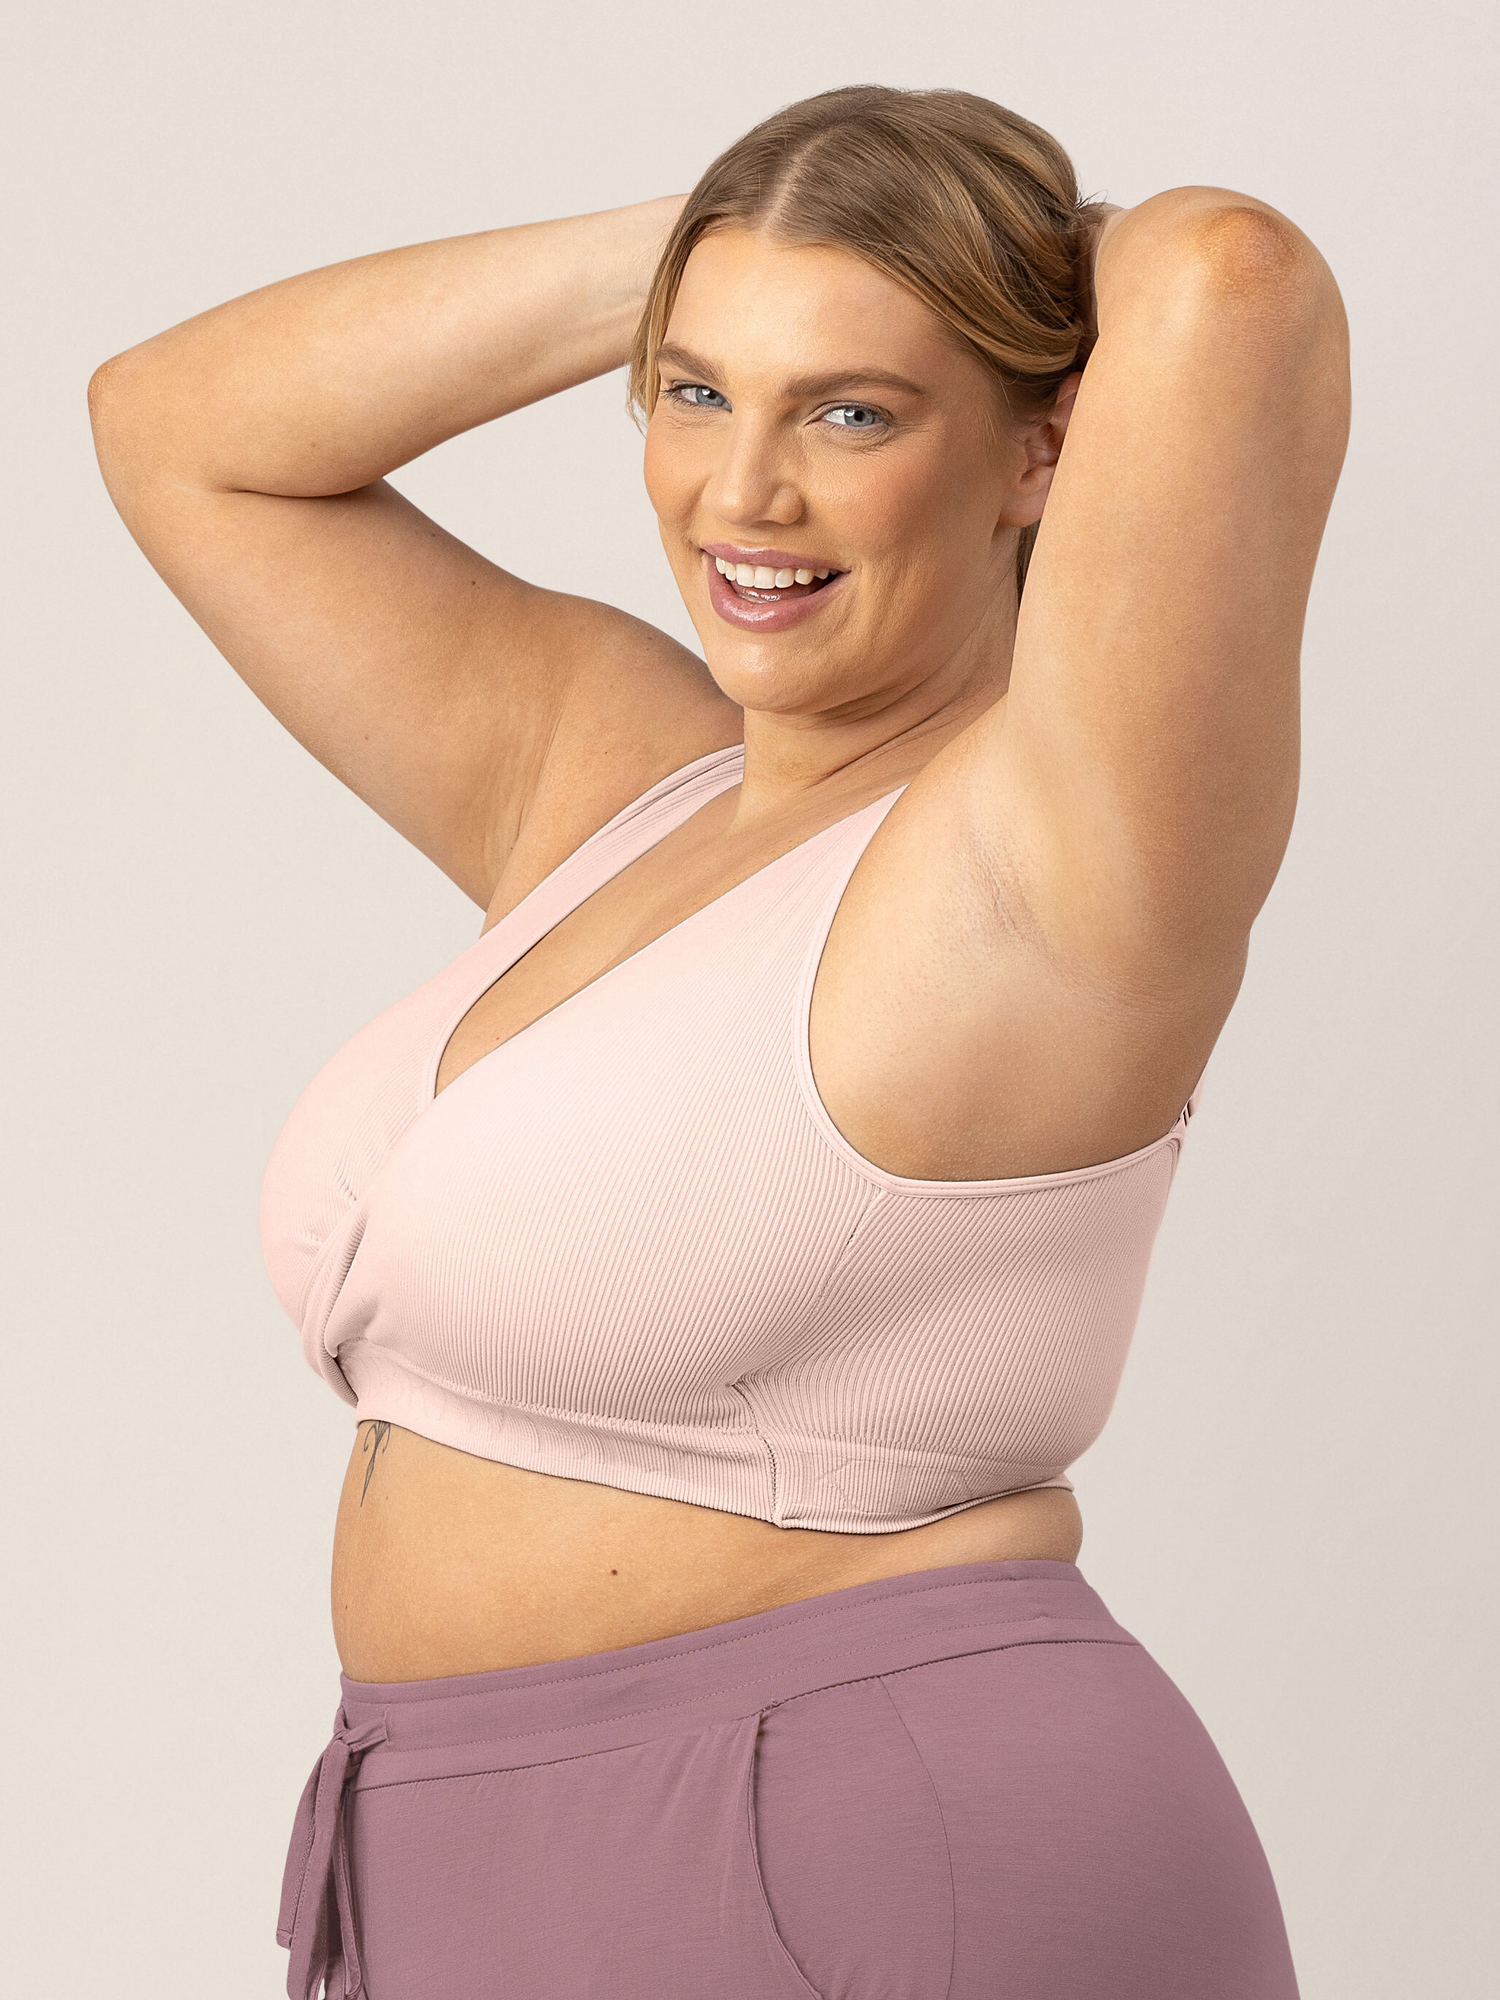 Busty model with her hands in her hair wearing the Sublime® Adjustable Crossover Nursing & Lounge Bra in Soft Pink